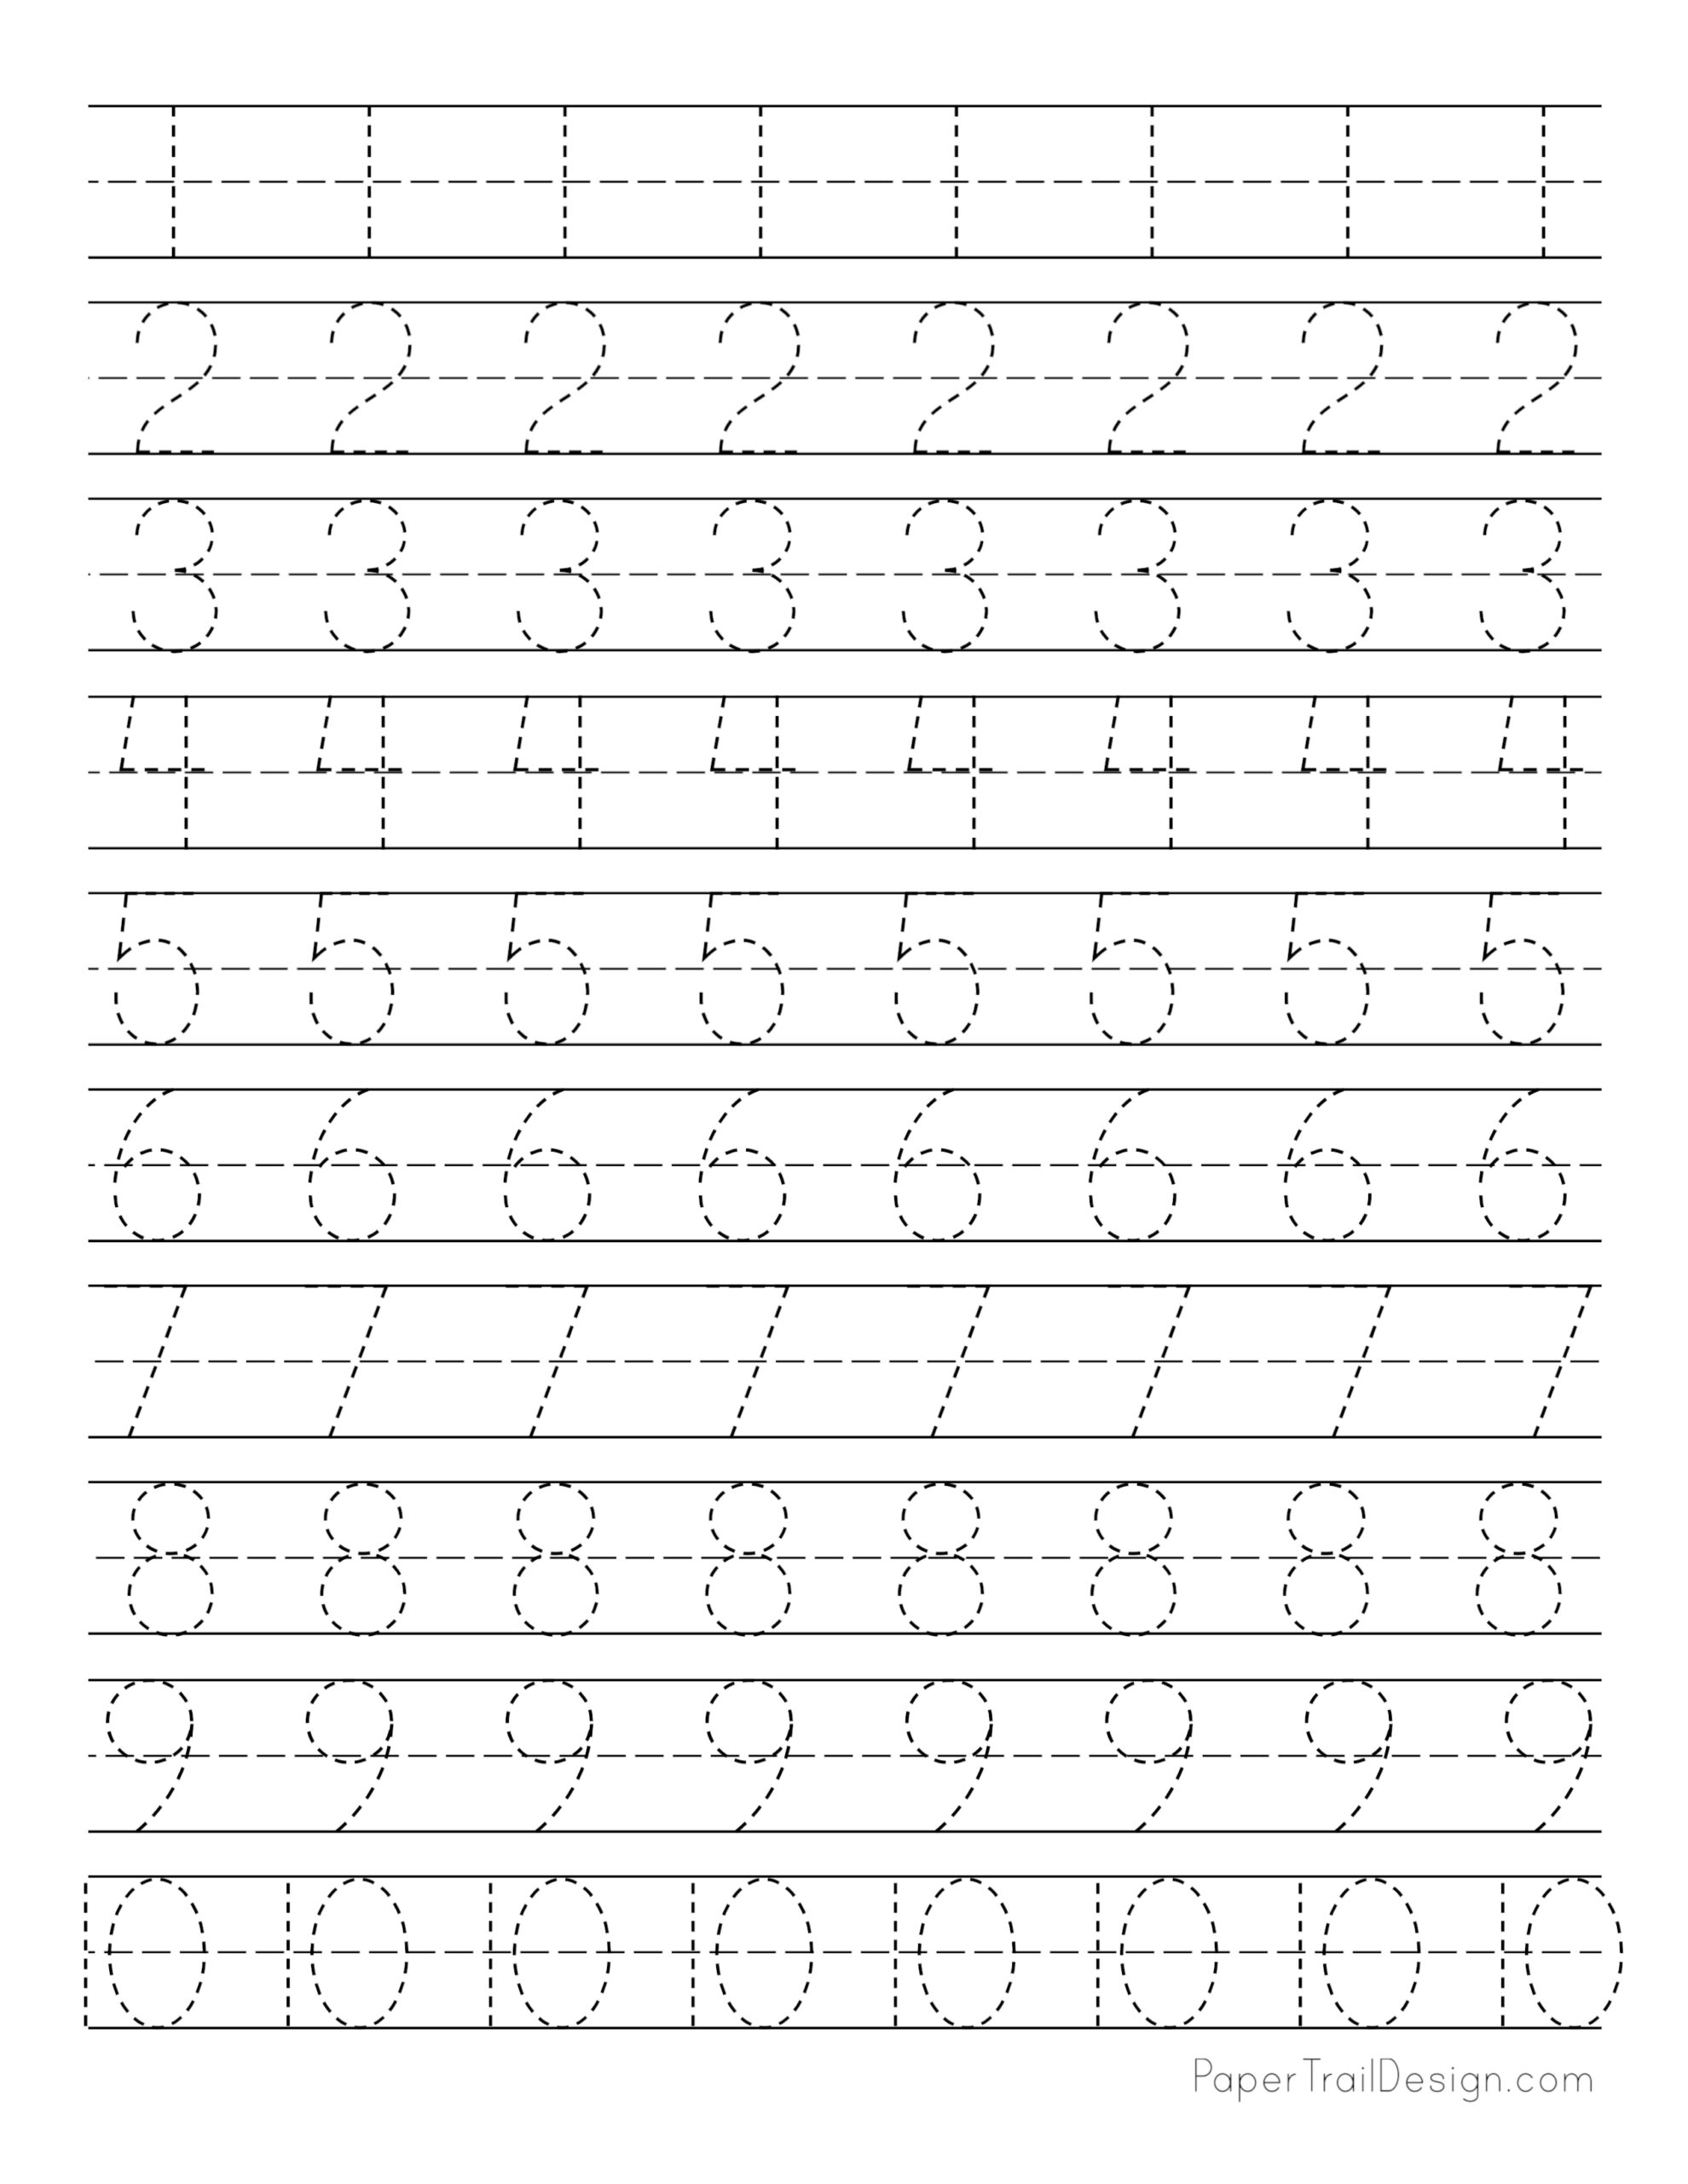 free-printable-worksheets-for-kids-tracing-numbers-1-20-worksheets-number-tracing-1-20-pdf